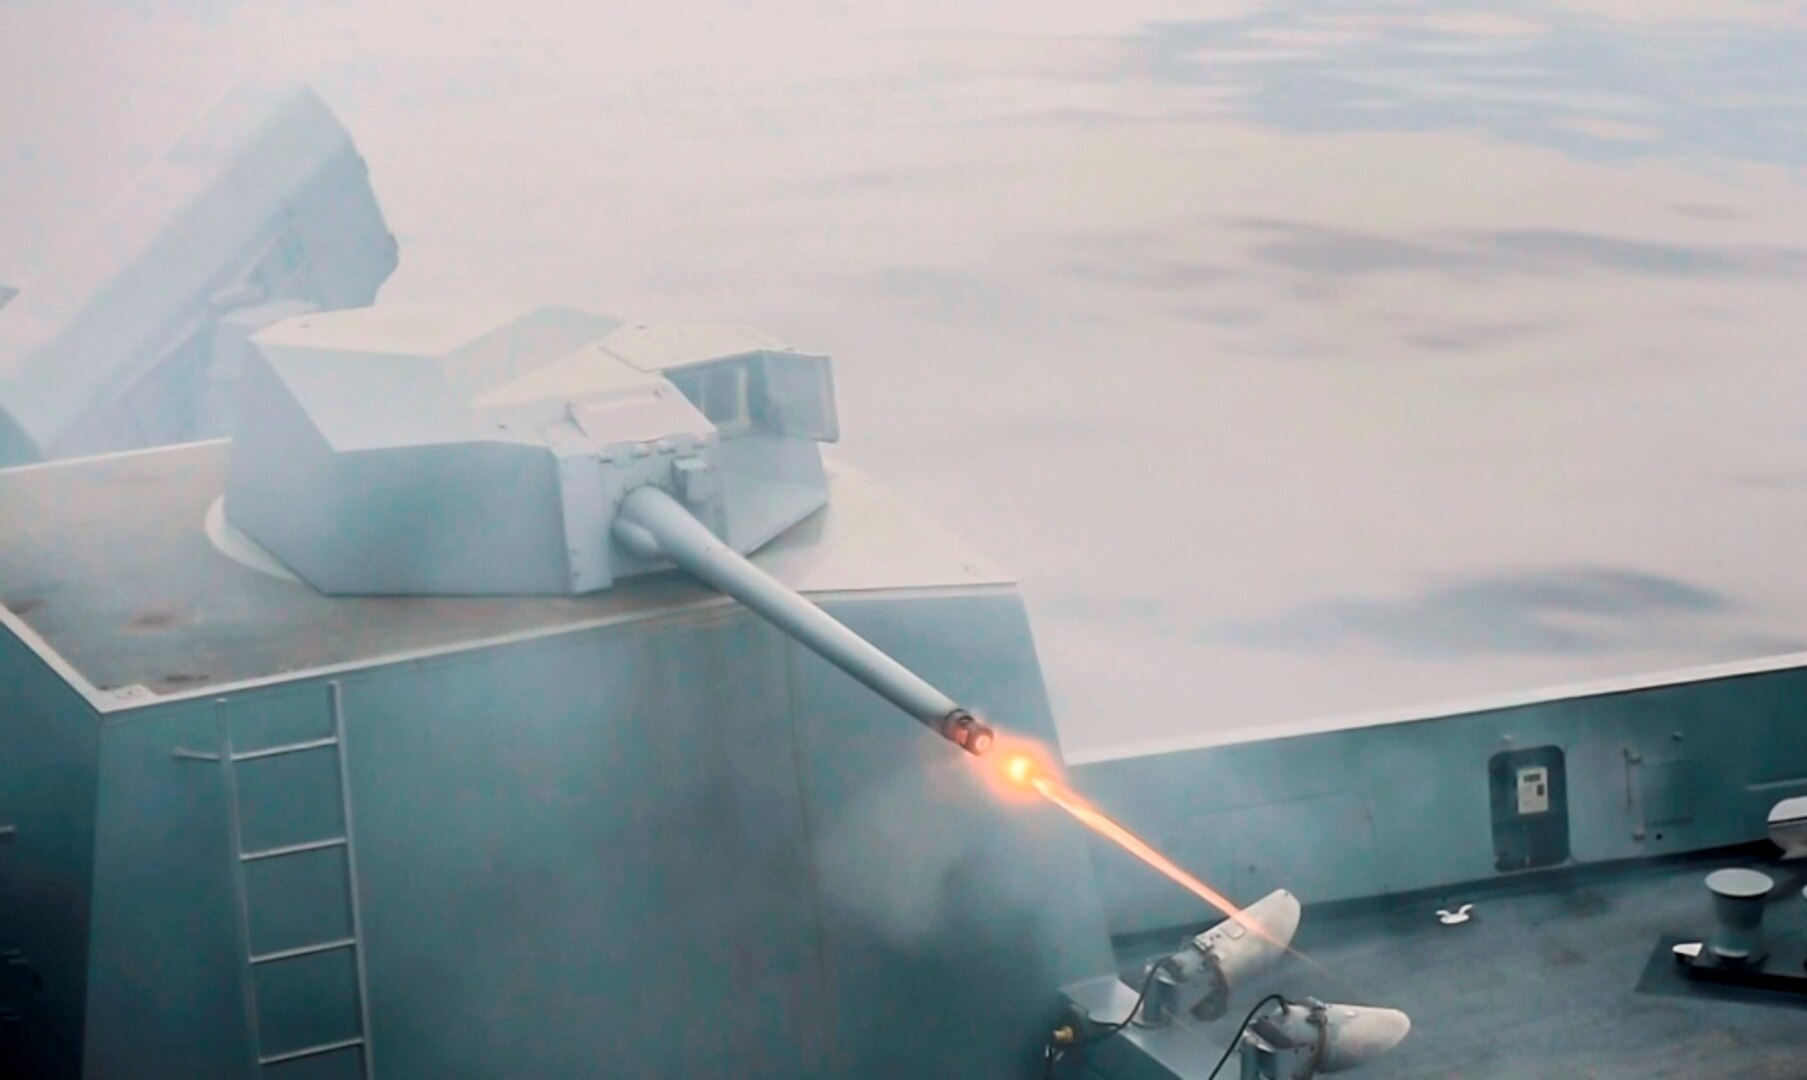 160817-N-XM324-120 
EAST CHINA SEA – The amphibious transport dock ship USS Green Bay (LPD 20) fires a MK-46 30mm gun during a live-fire exercise. Navy scientists and engineers evaluated a strike group’s Aegis combat system and gun weapon systems – including the 30 millimeter gun – as well as unmanned vehicles integrated with surface and air assets at the 2016 USS Dahlgren demonstration, Aug. 30. The test – made possible by a cybernetic laboratory called USS Dahlgren – proved engagement coordination across the simulated battlegroup and live fire destruction of multiple targets from two combatants utilizing two different gun based systems. “This has been five to six years in the making and couldn't come at a better time as we see real-world events such as the recent small boat incursions in the Middle East, highlighting the need for the Fleet,” said Capt. Brian Durant, NSWCDD commanding officer. 